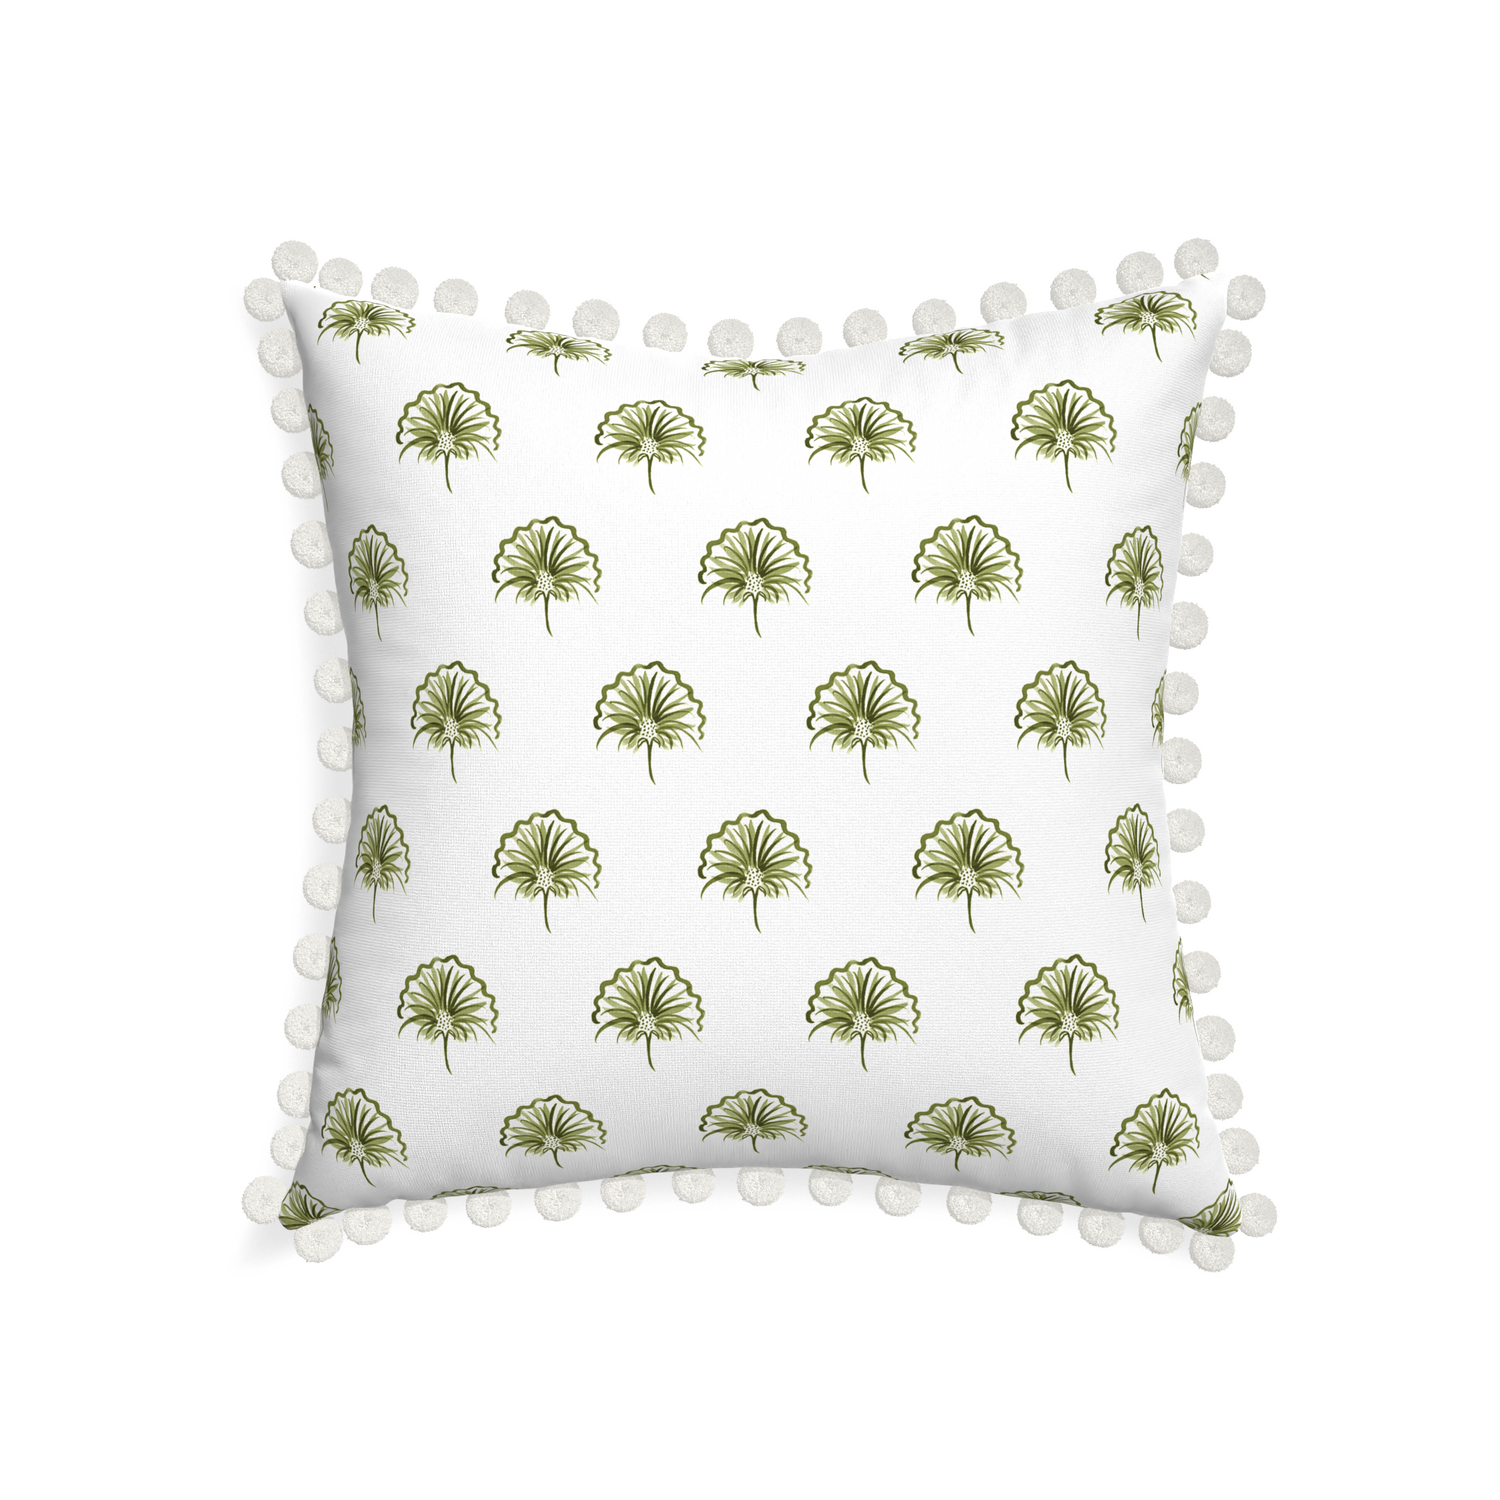 22-square penelope moss custom green floralpillow with snow pom pom on white background